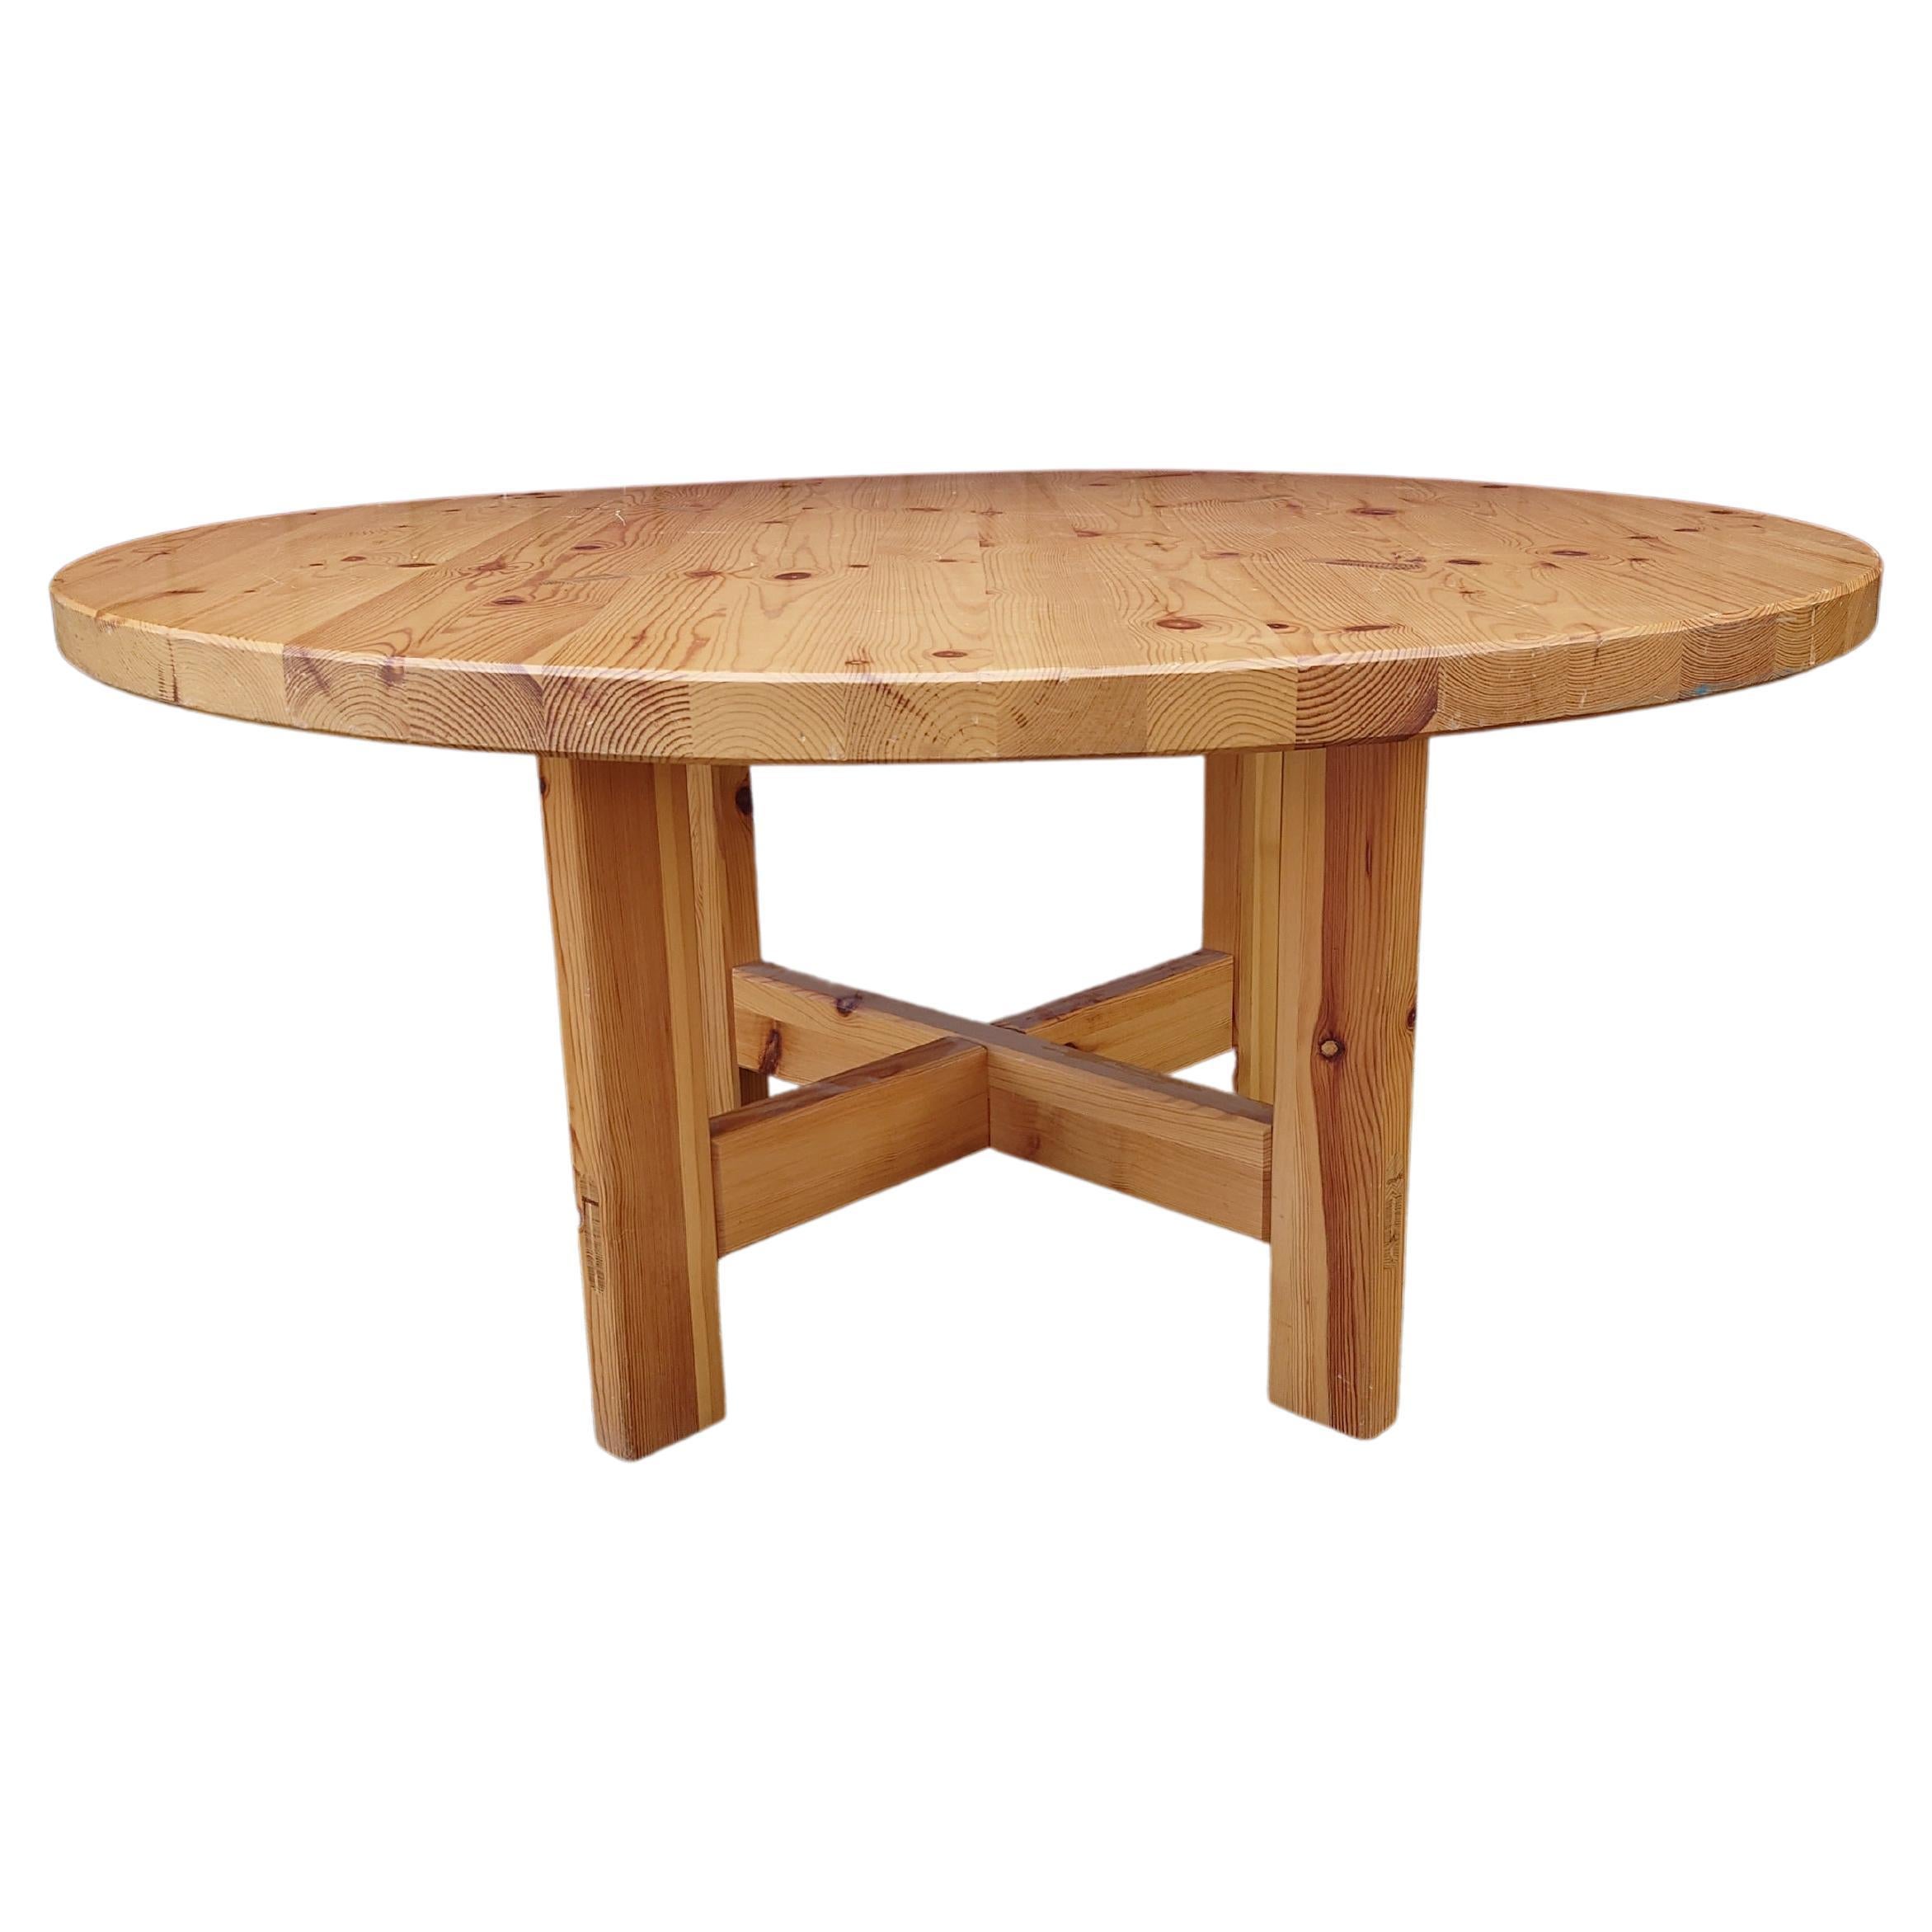 Dining Table "Rw152" by Roland Wilhelmsson for Karl Andersson & Söner 1970s Pine For Sale